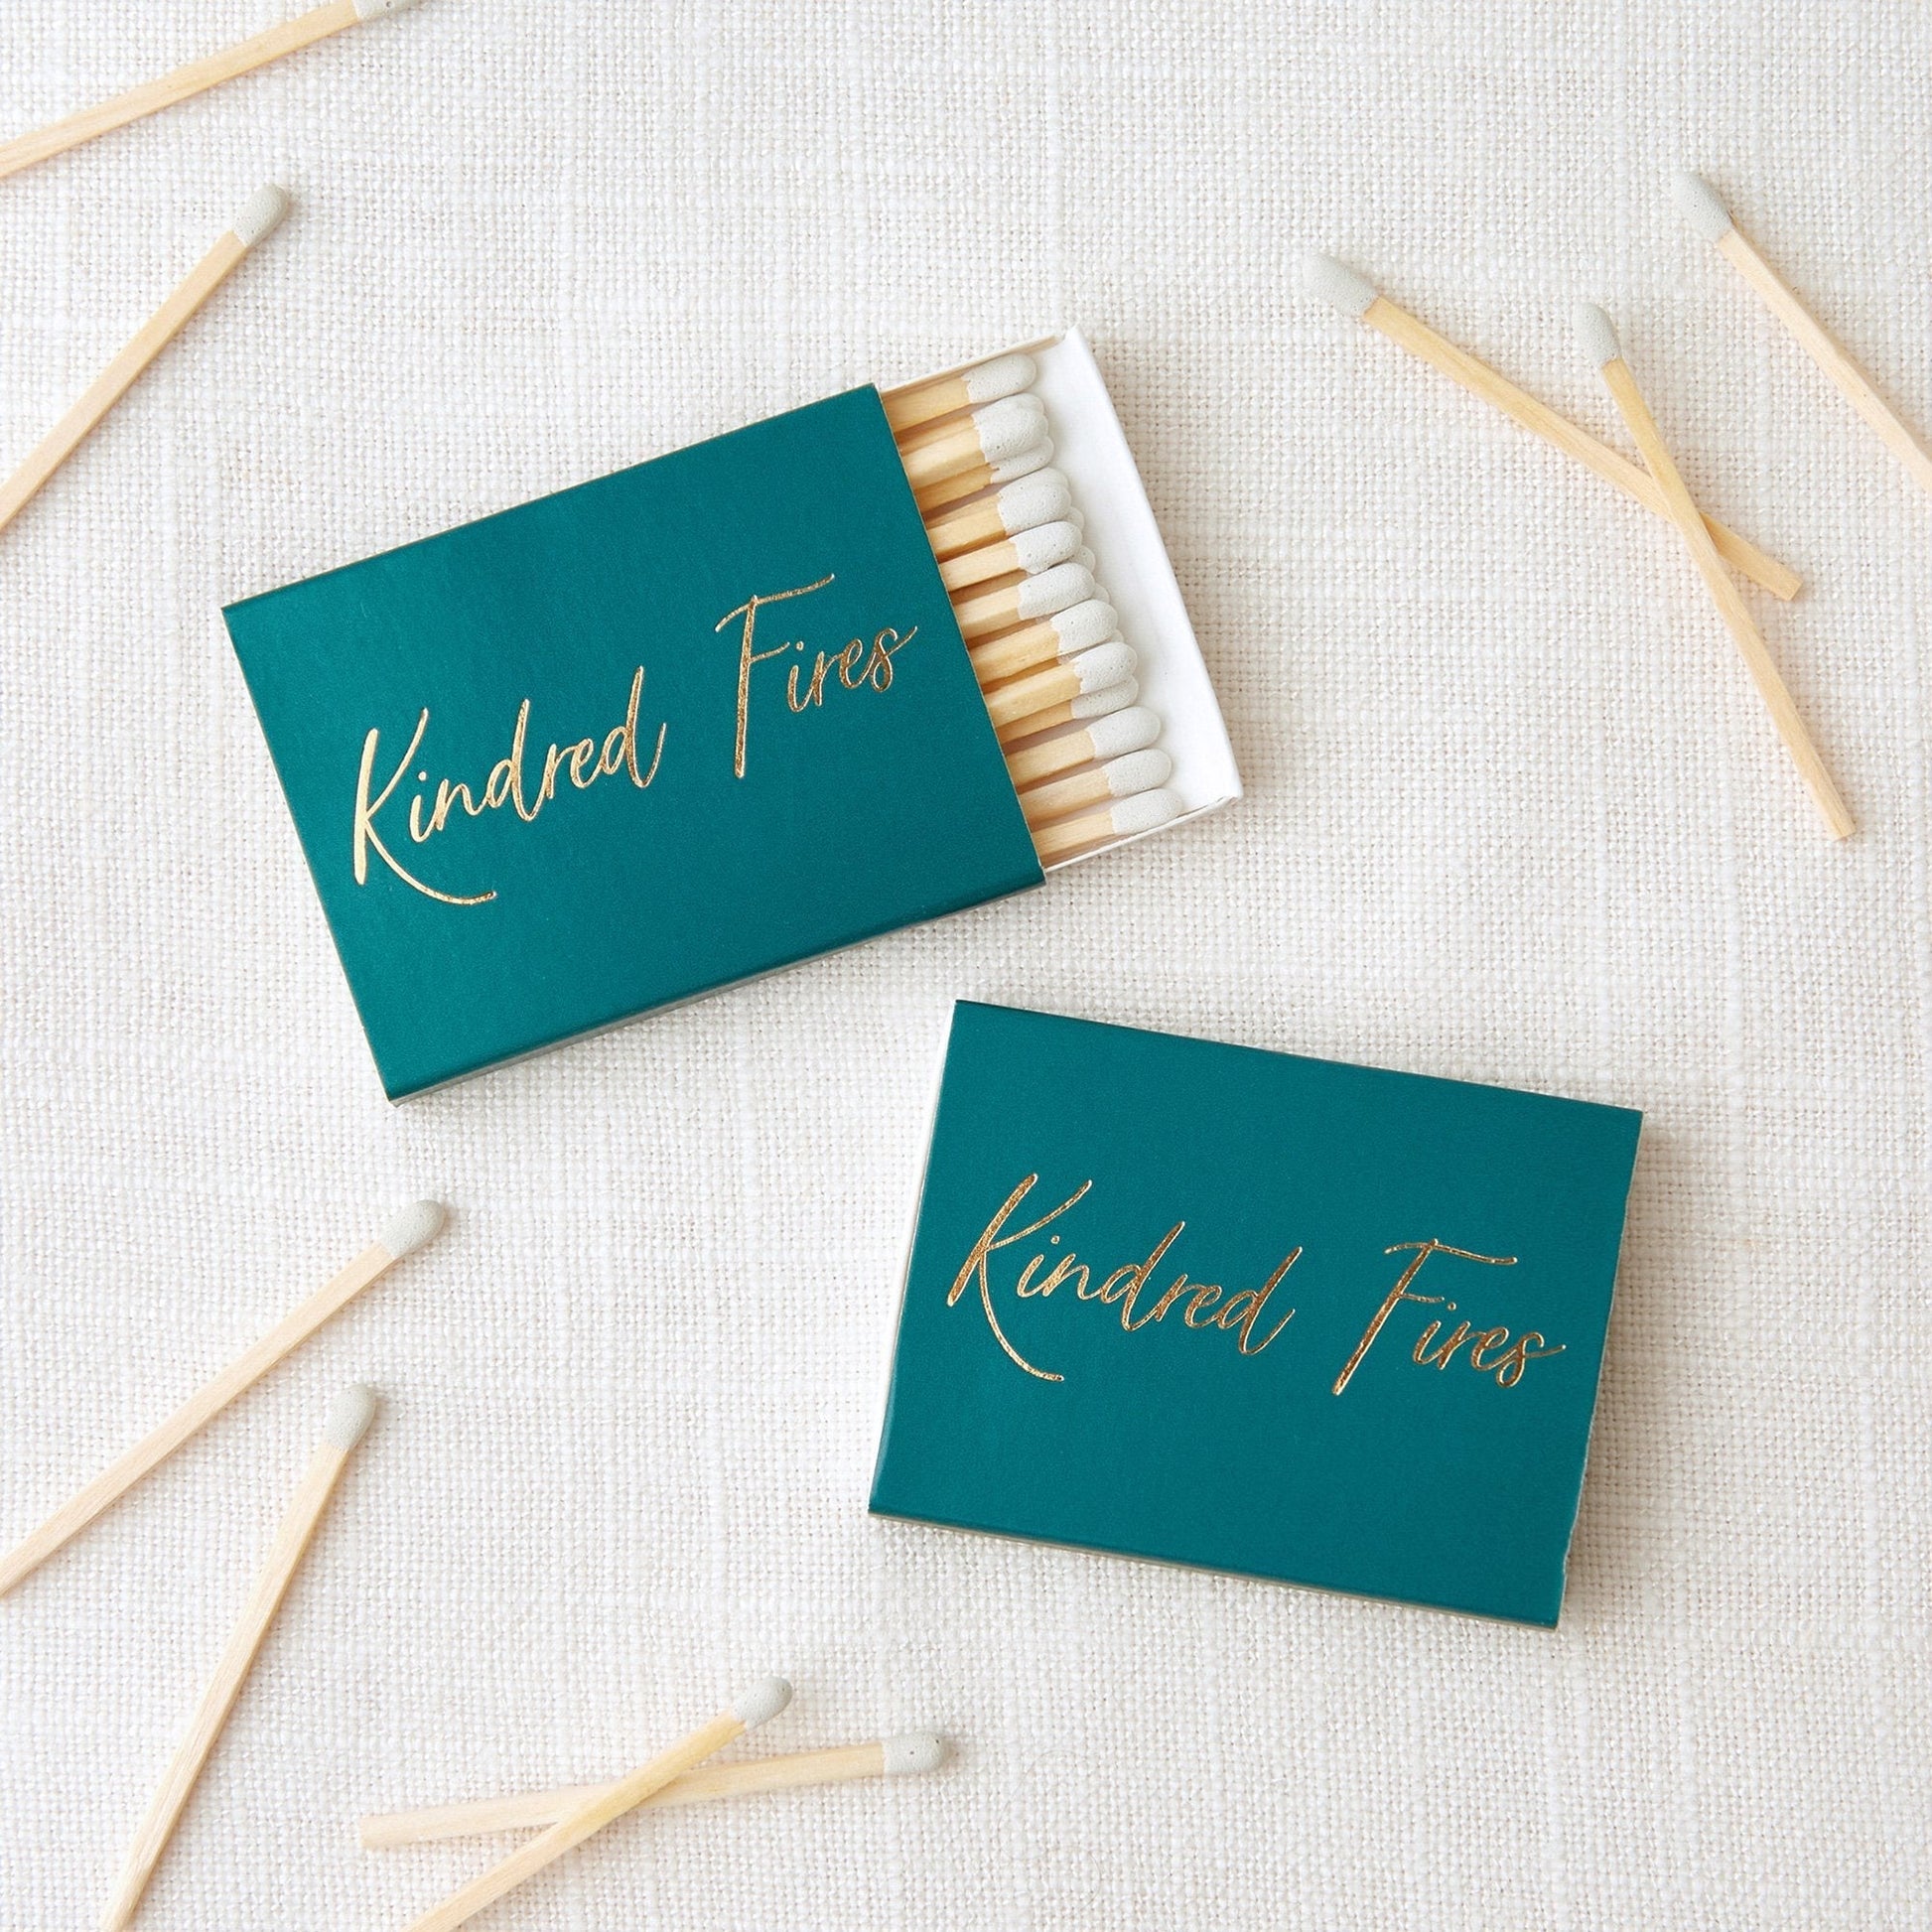 Matchbox with Matches - Kindred Fires